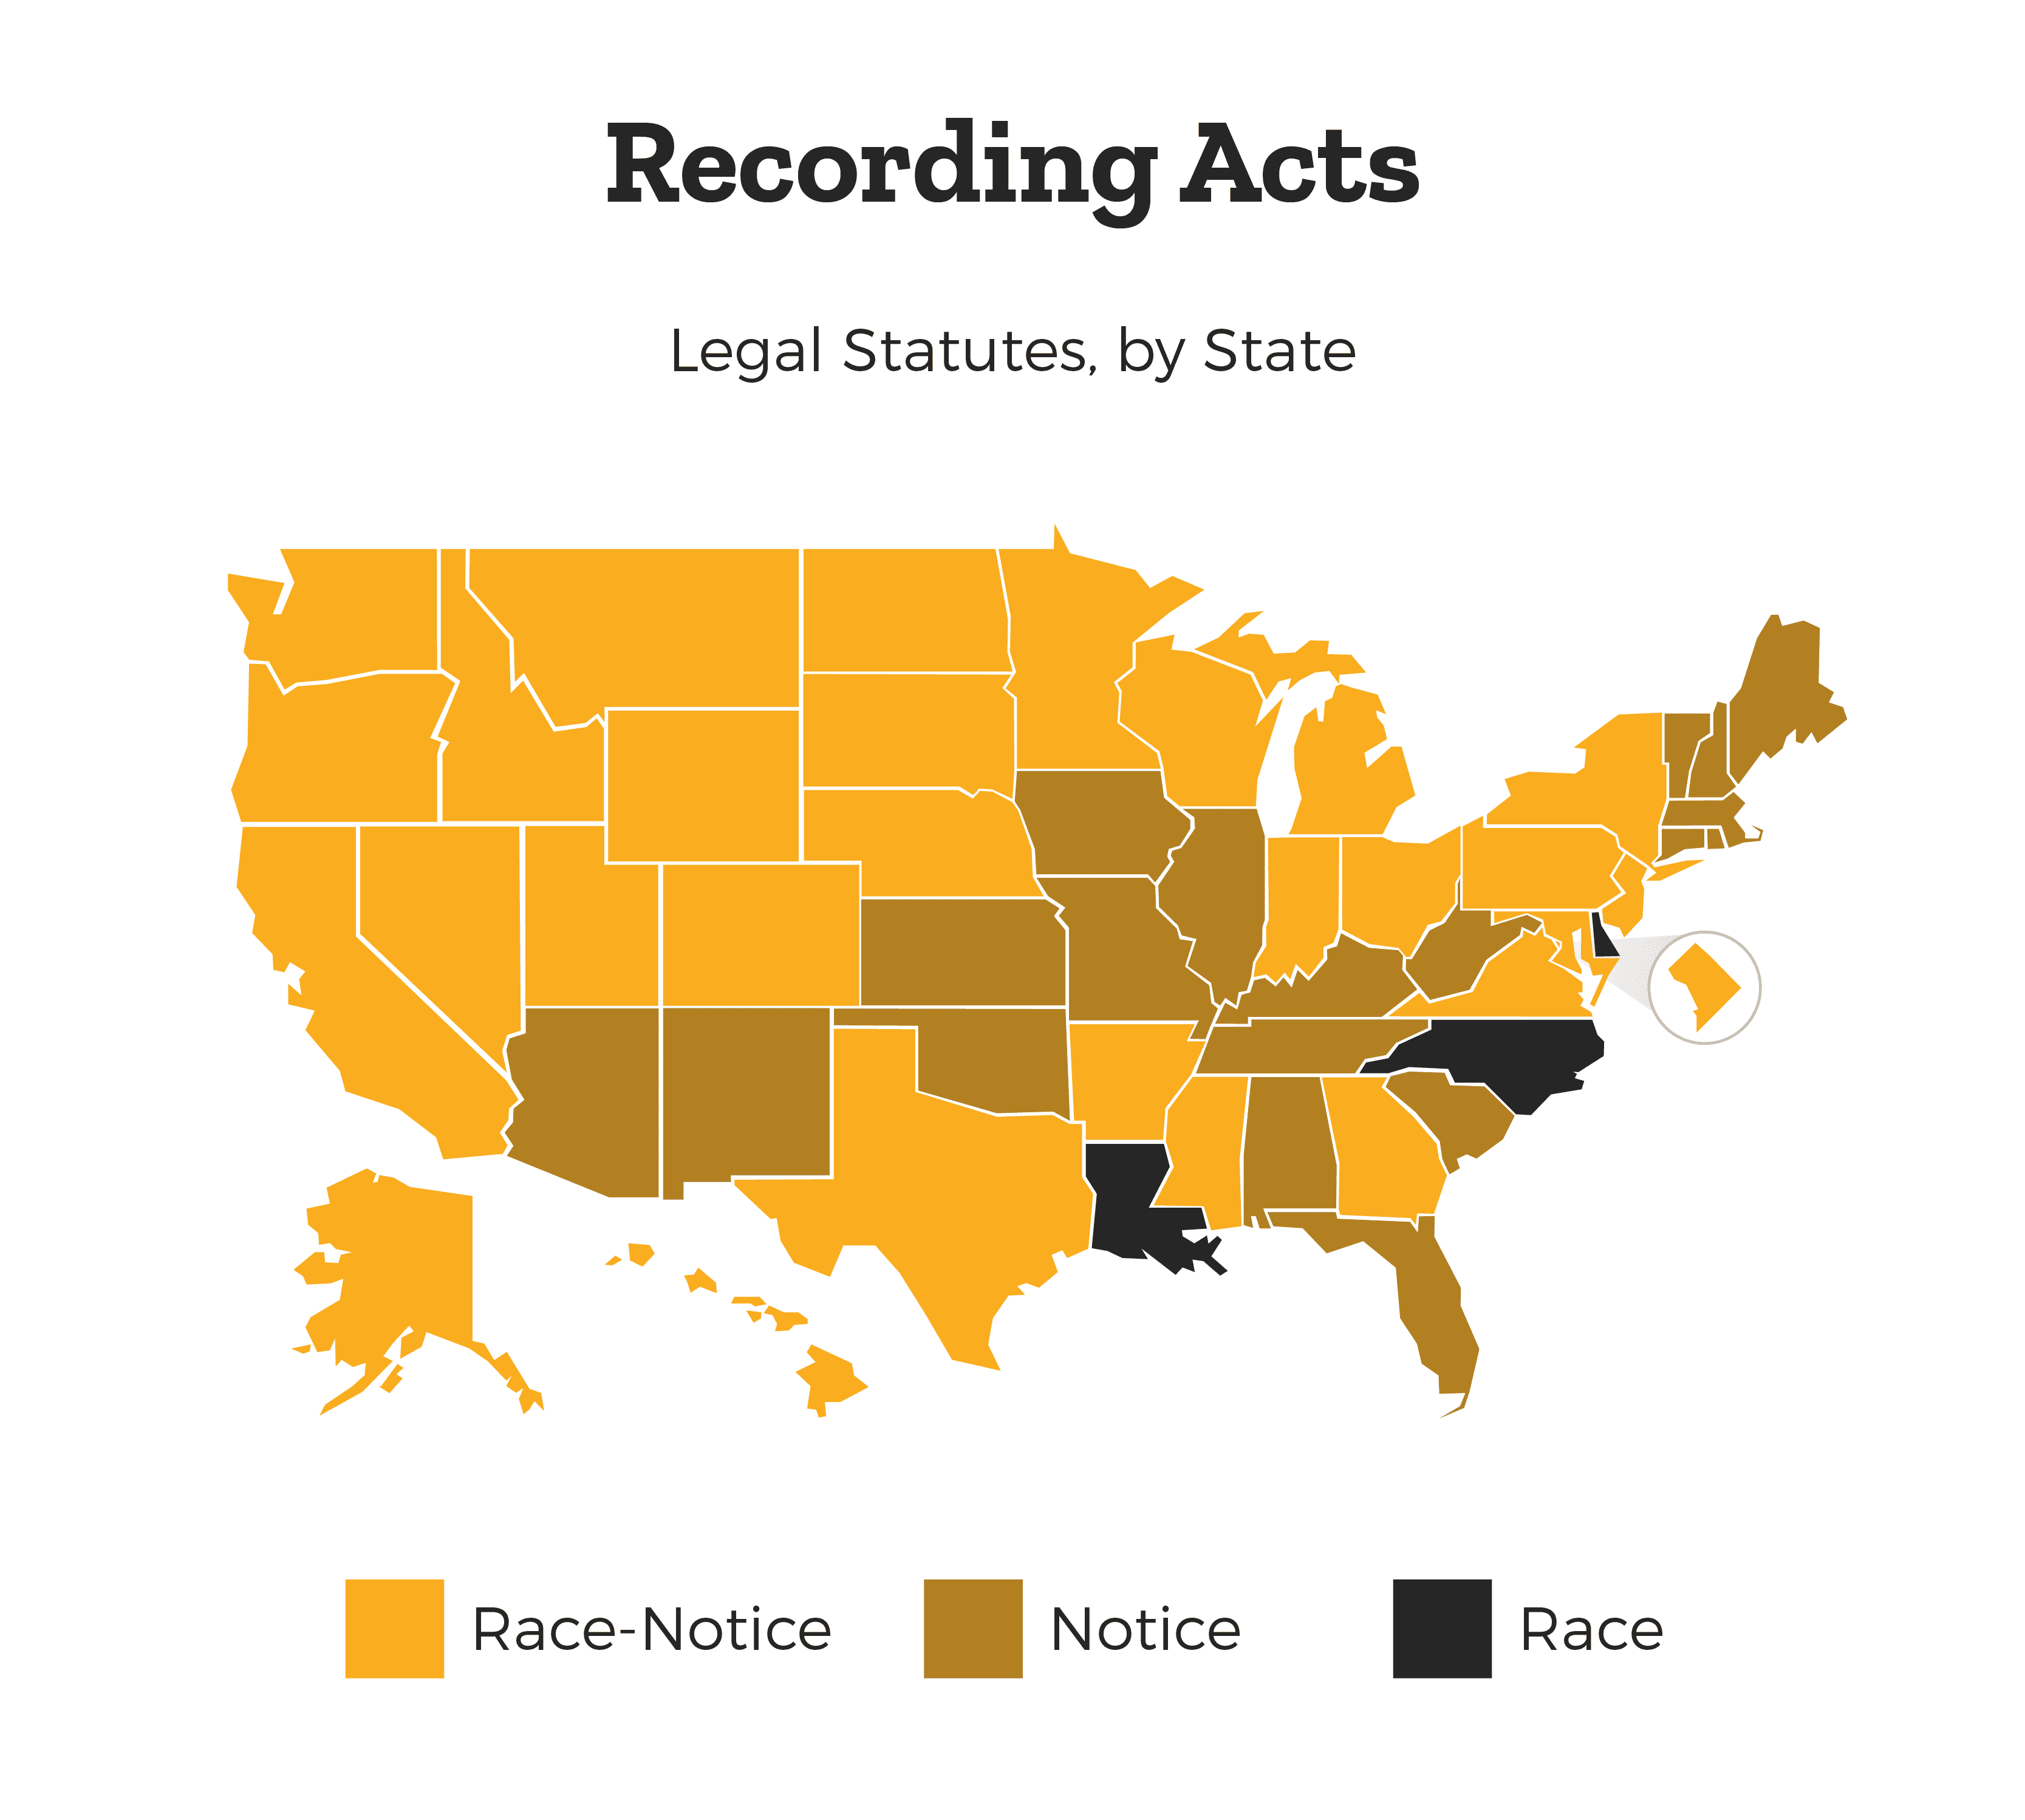 Map of Recording Acts - Legal Statutes by State color coded by three categories: race-notice, notice, and race.